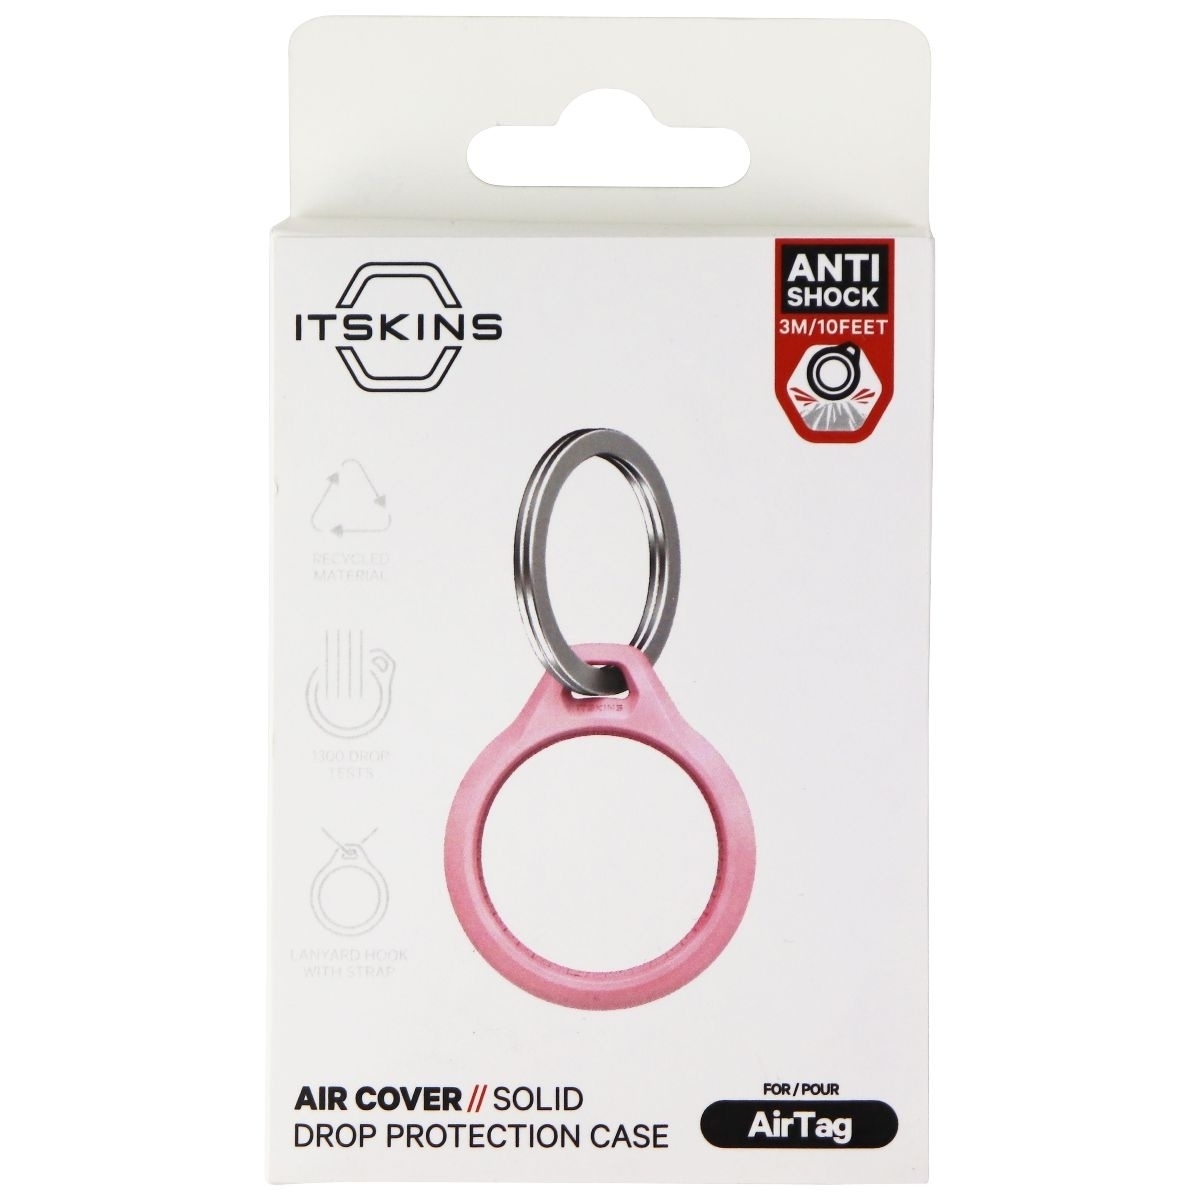 ITSKINS Solid Air Cover Drop Protection Case For Apple AirTag - Light Pink